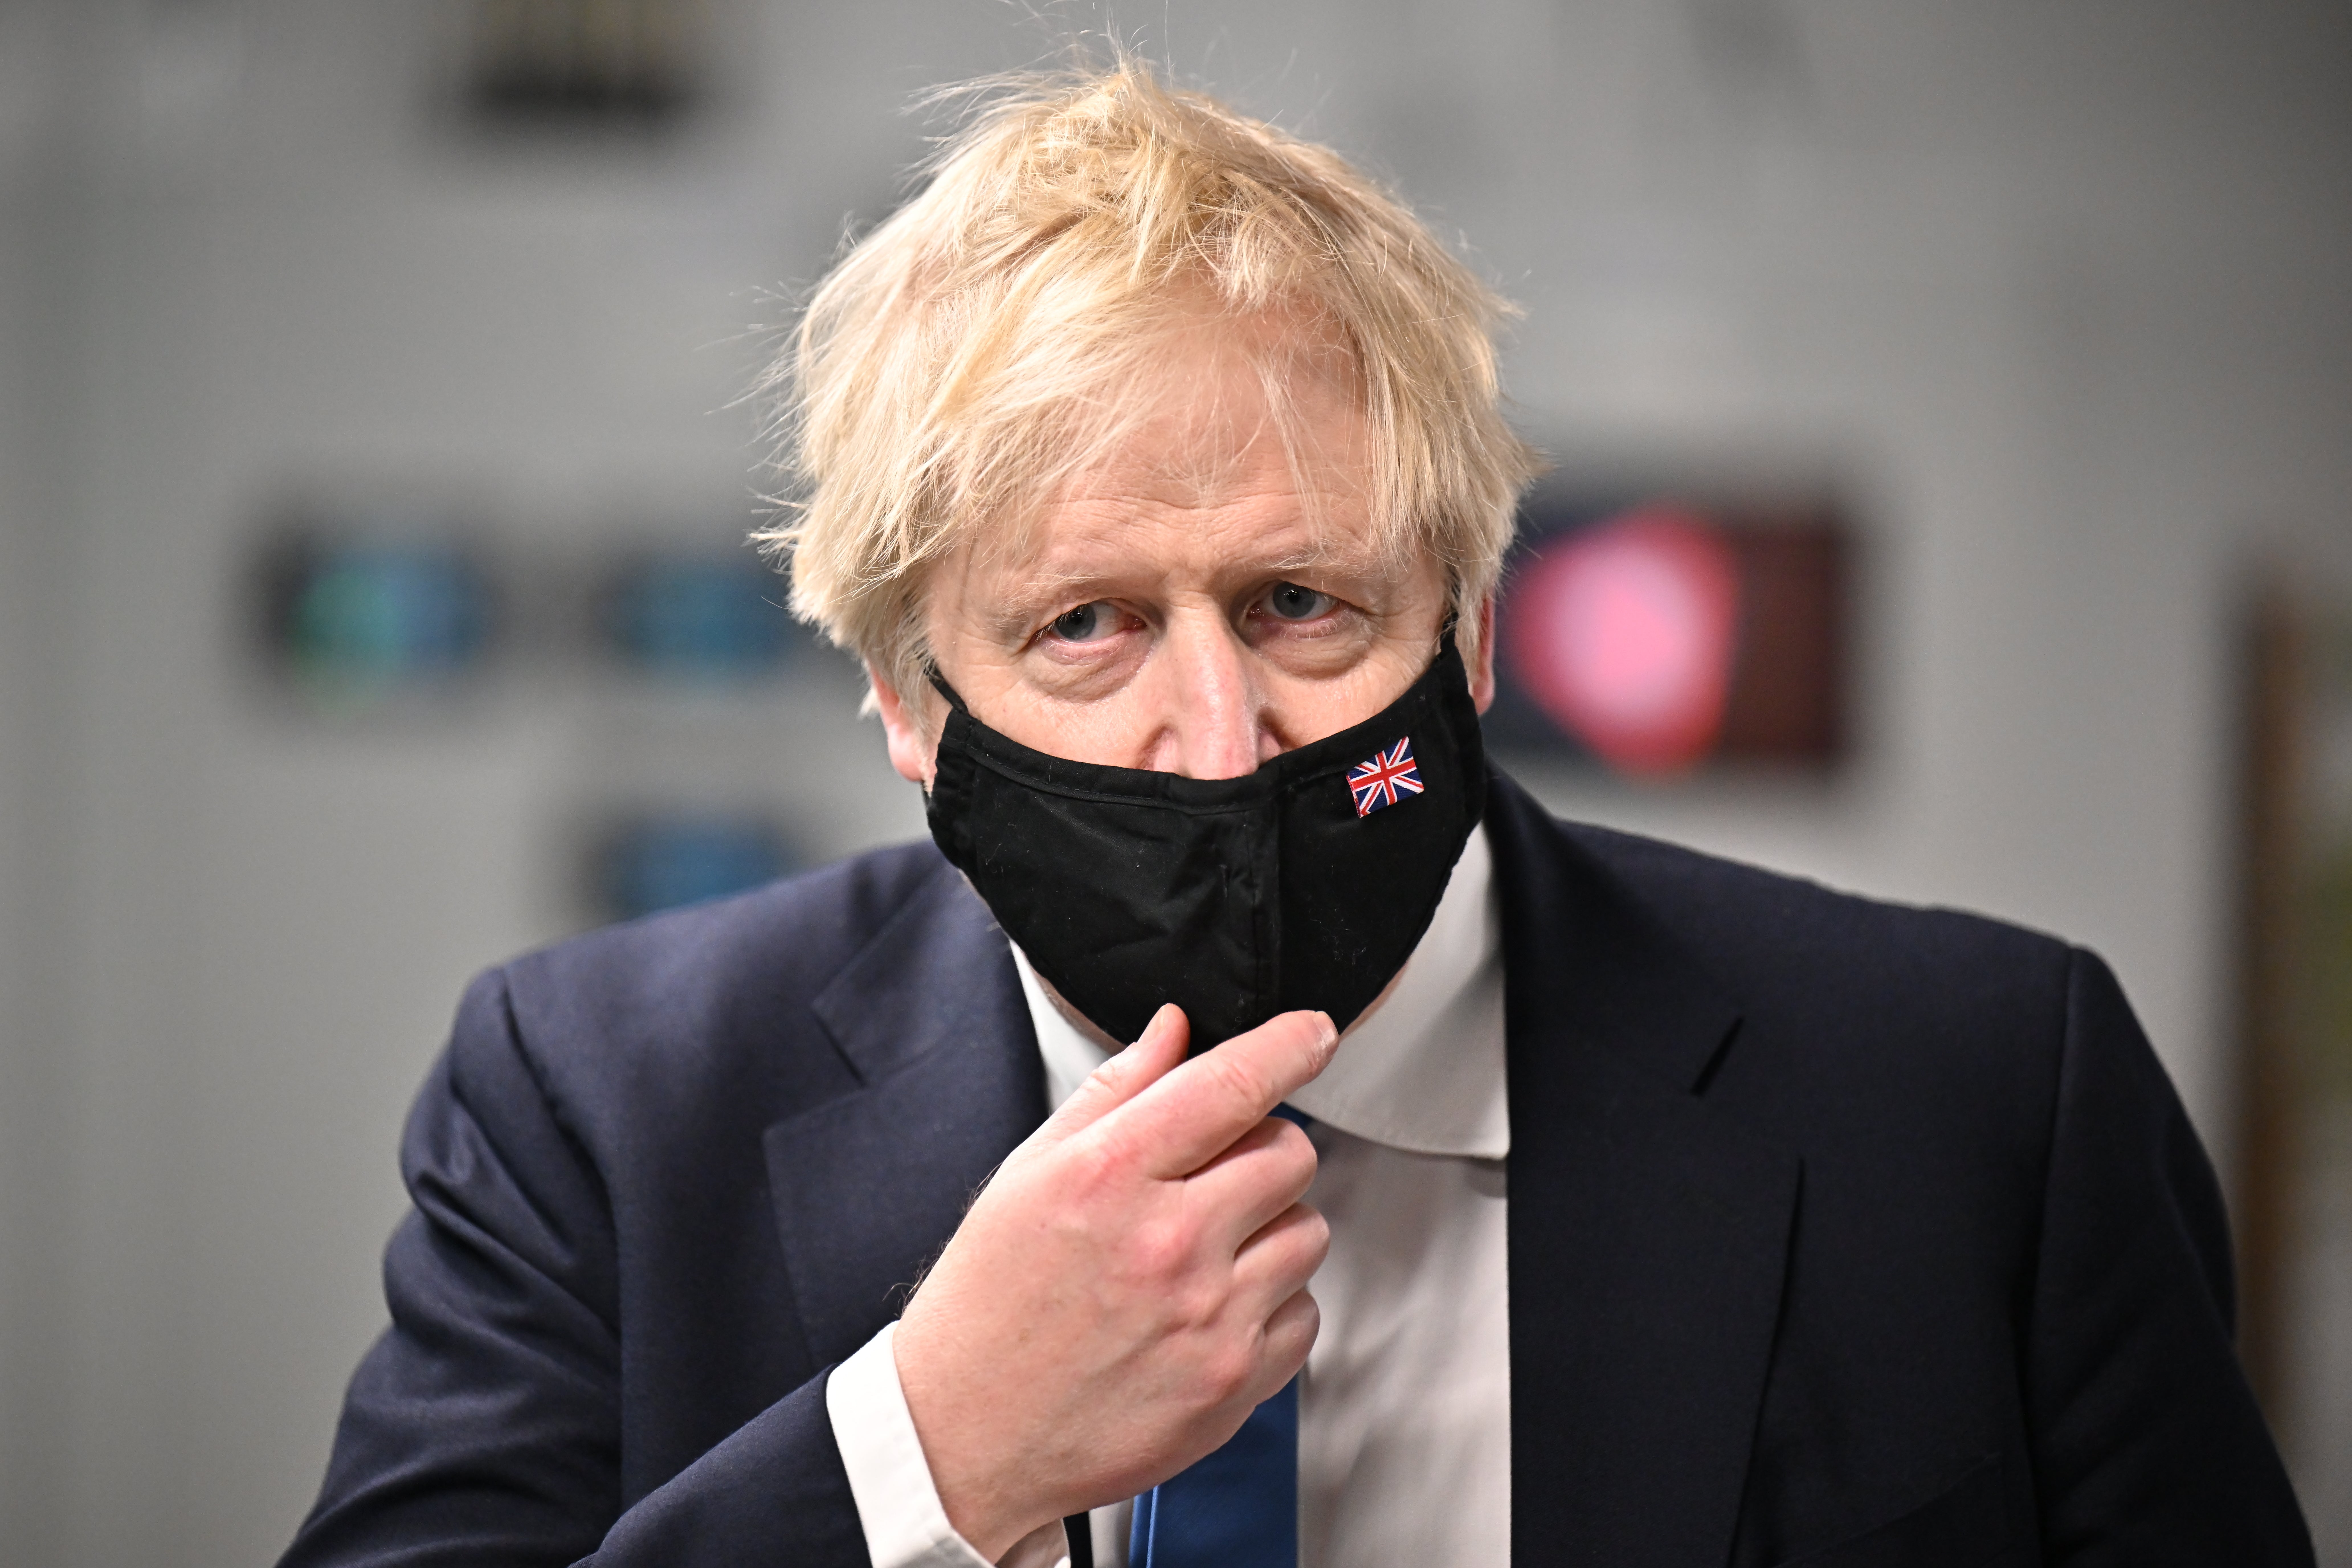 Prime Minister Boris Johnson’s personal poll ratings have slipped, according to a new survey (Jeff J Mitchell/PA)